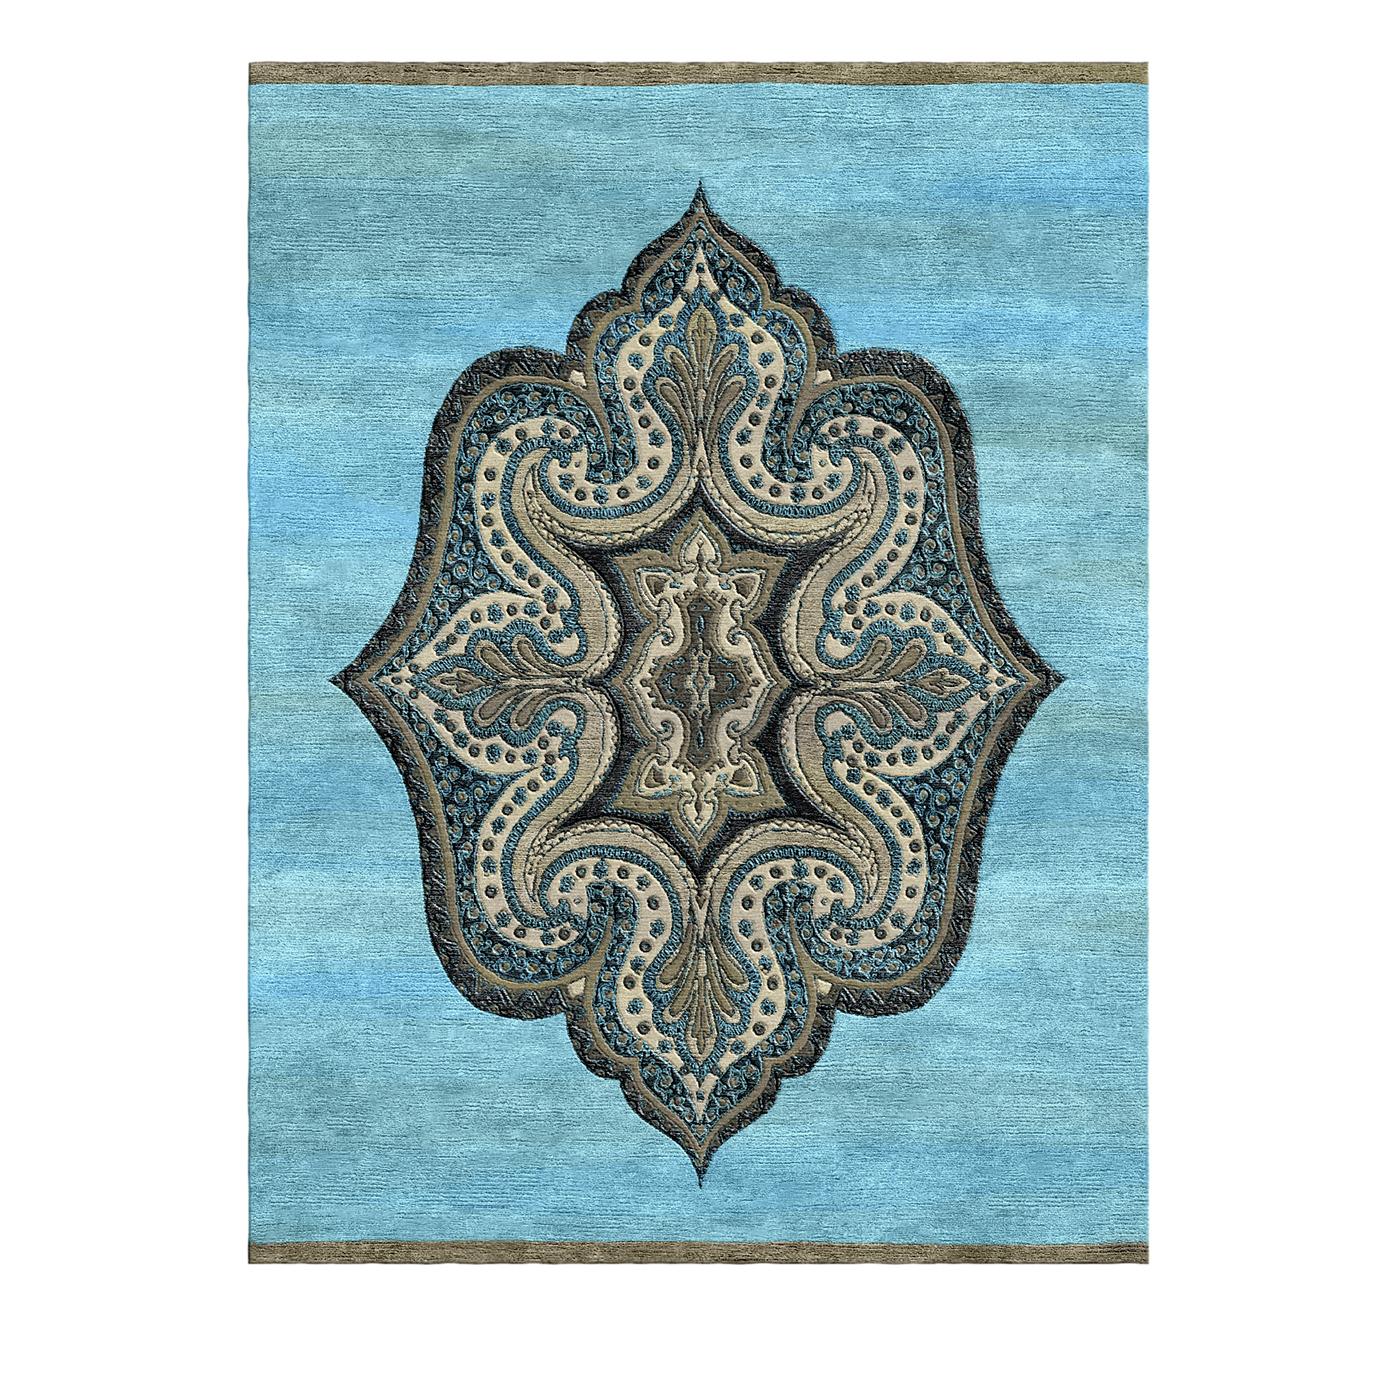 This exceptional rug is handmade in India with Tibetan knotting techniques. The mandala design showcases a kaleidoscope-inspired pattern distinguished for its elaborate scroll and frond motifs. Lavishly rendered in rich hues of bright blue and gray,